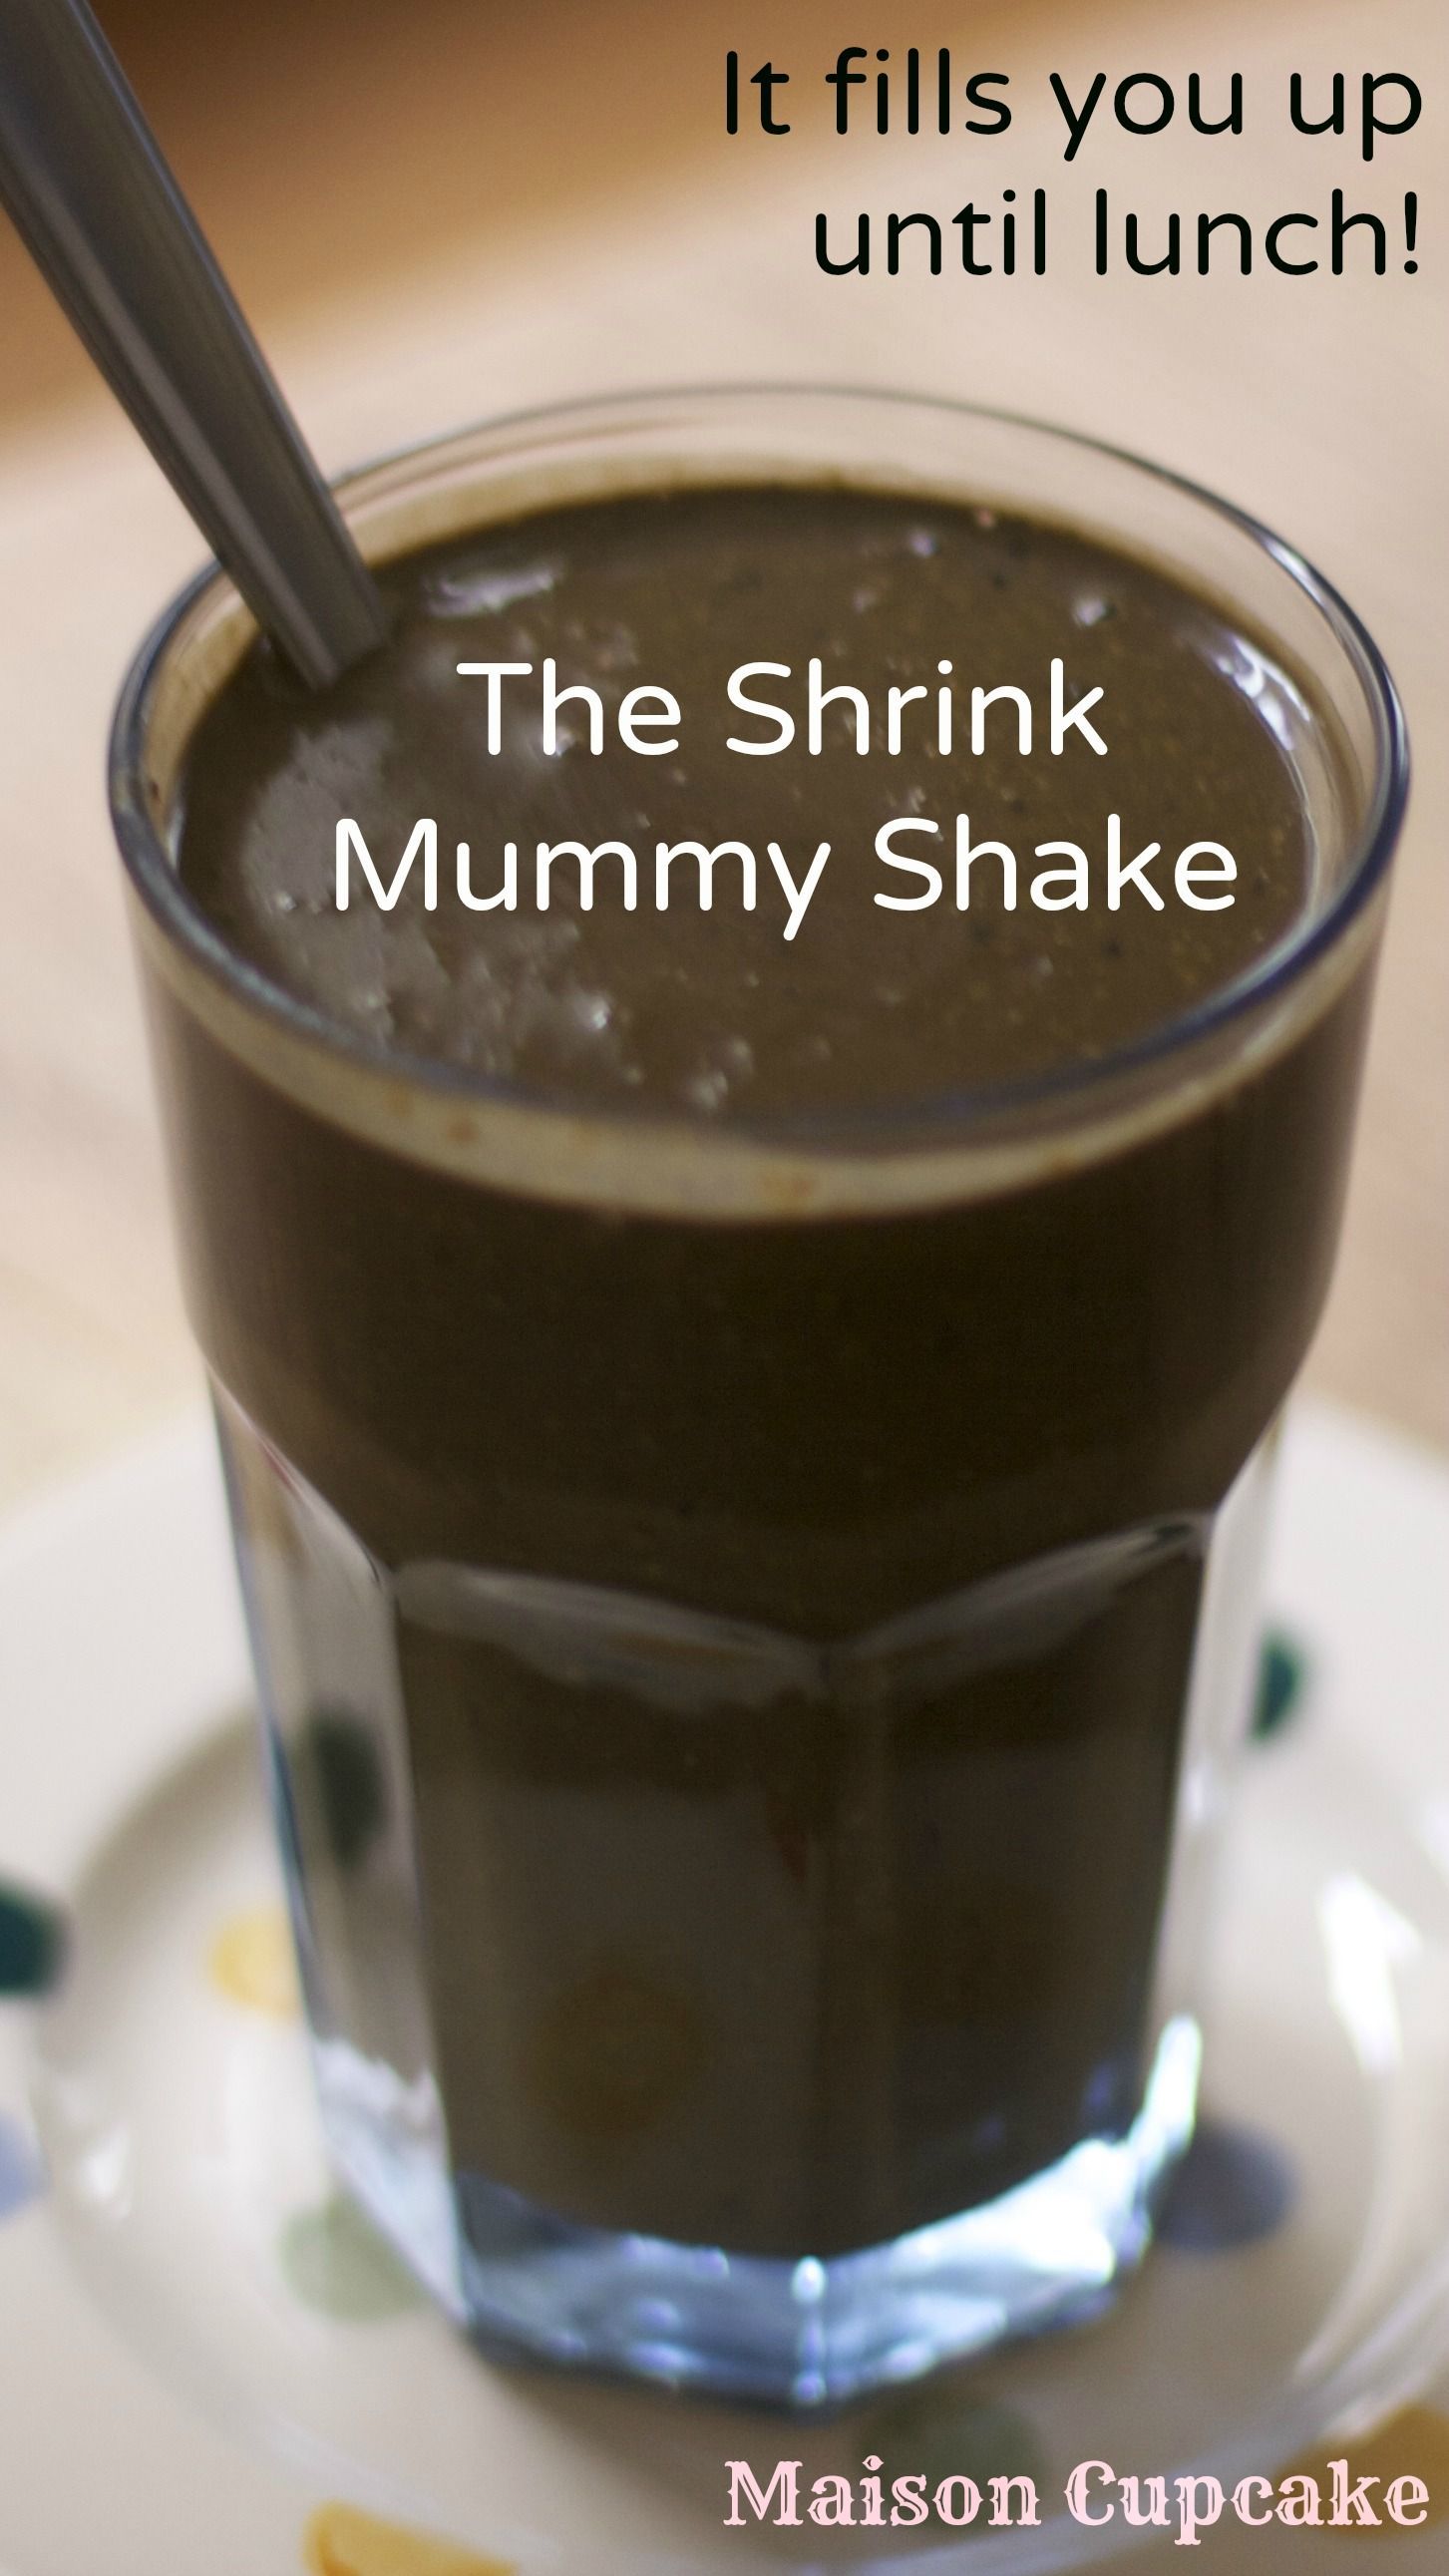 Are you ready for a chocolate detox drink? #vegan #weightloss #healthy